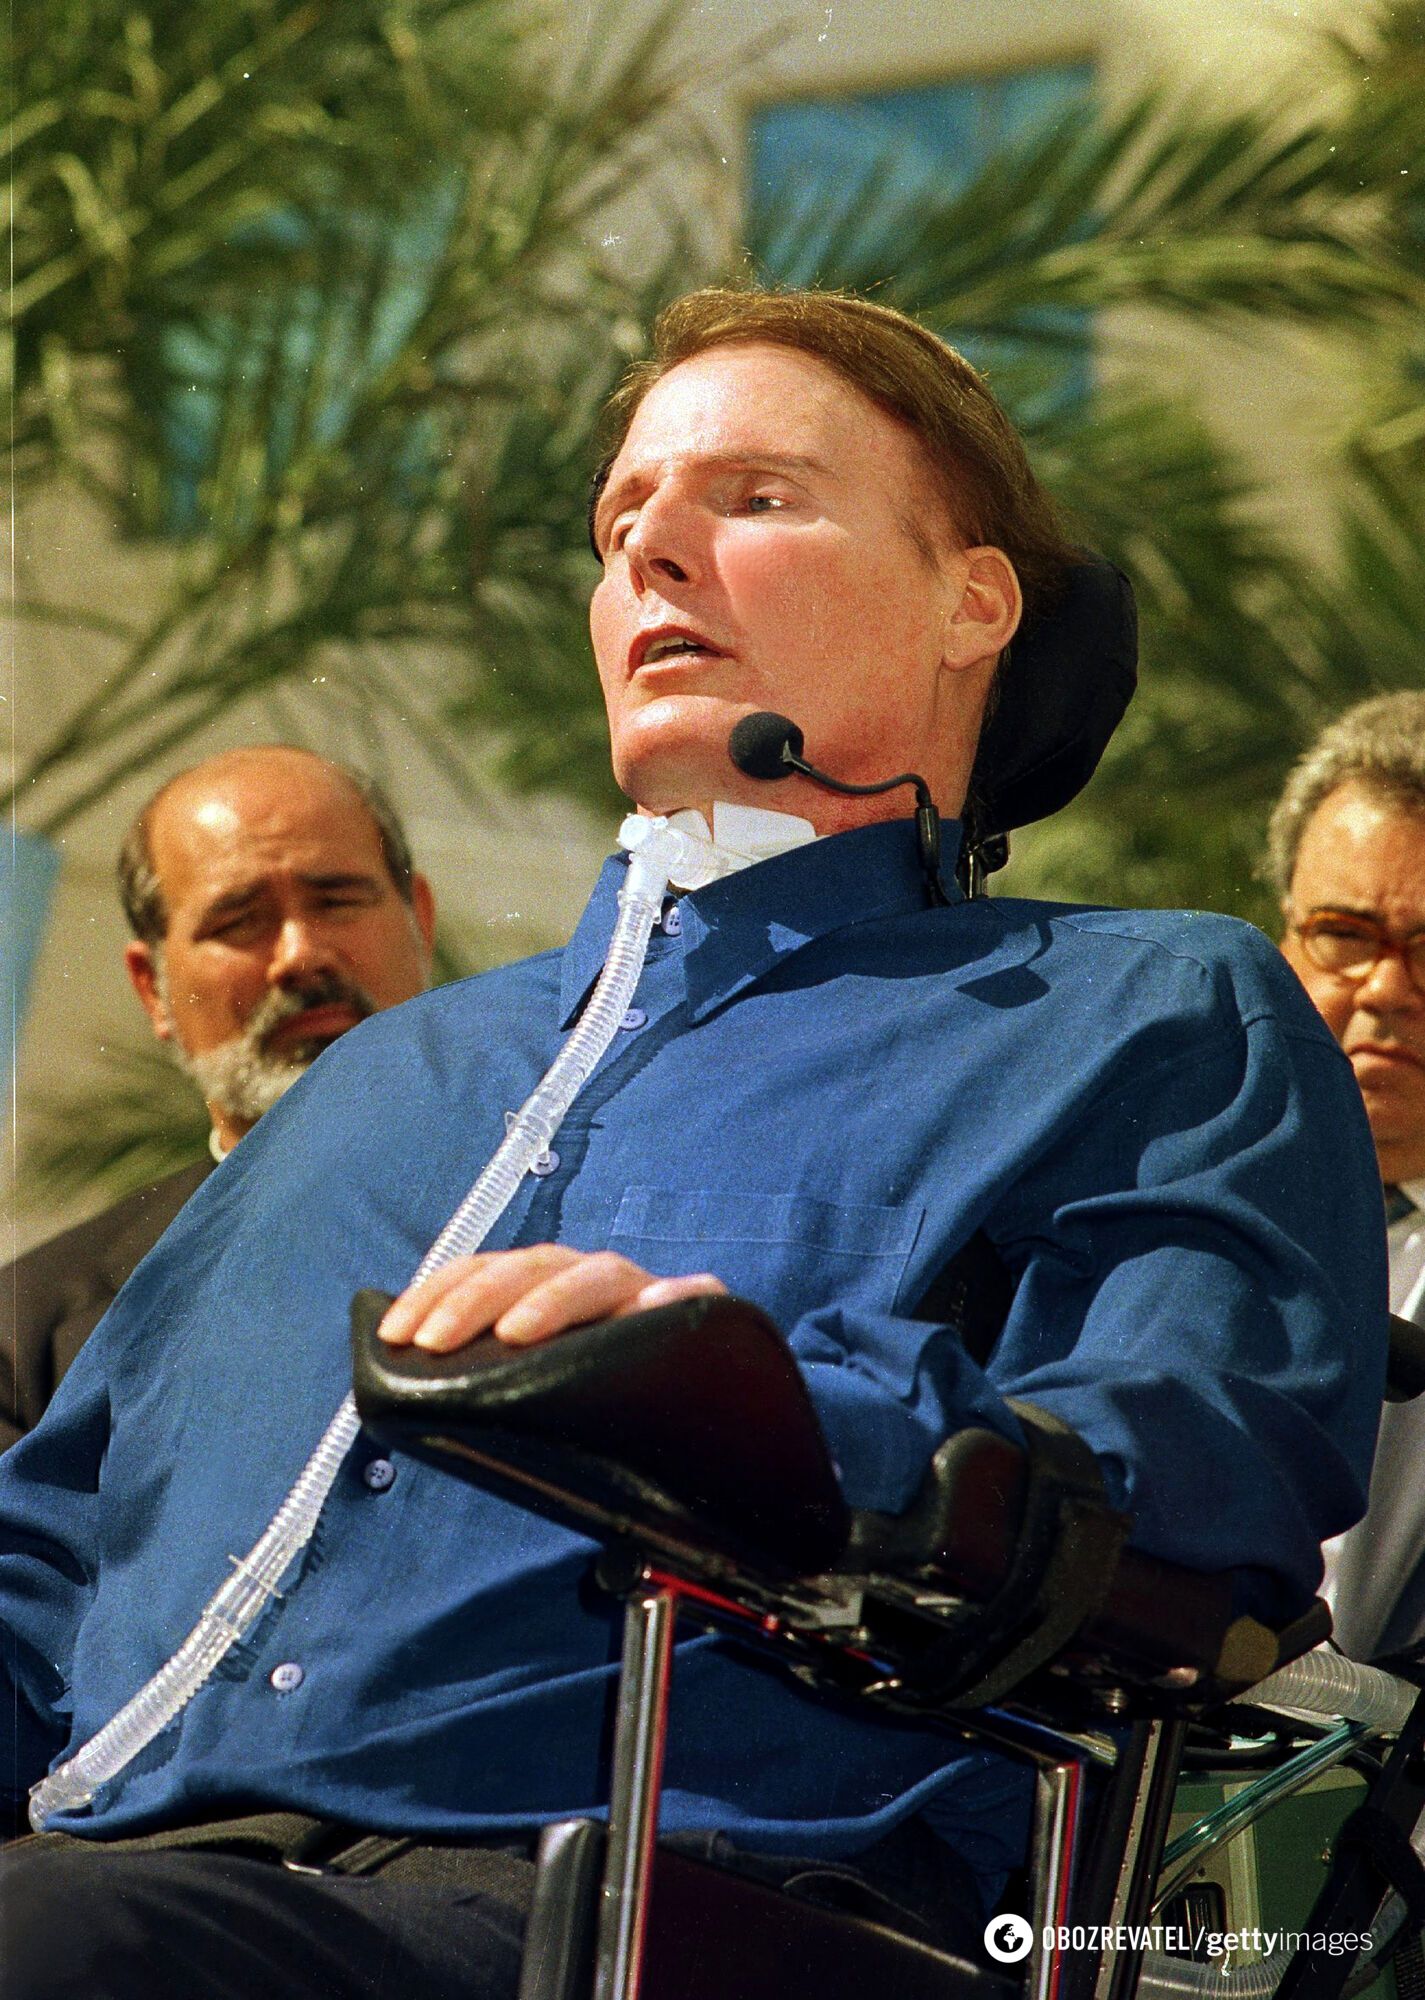 He was Superman, but ended up in a wheelchair: the tragic life story of Christopher Reeve, who remained a superman despite everything